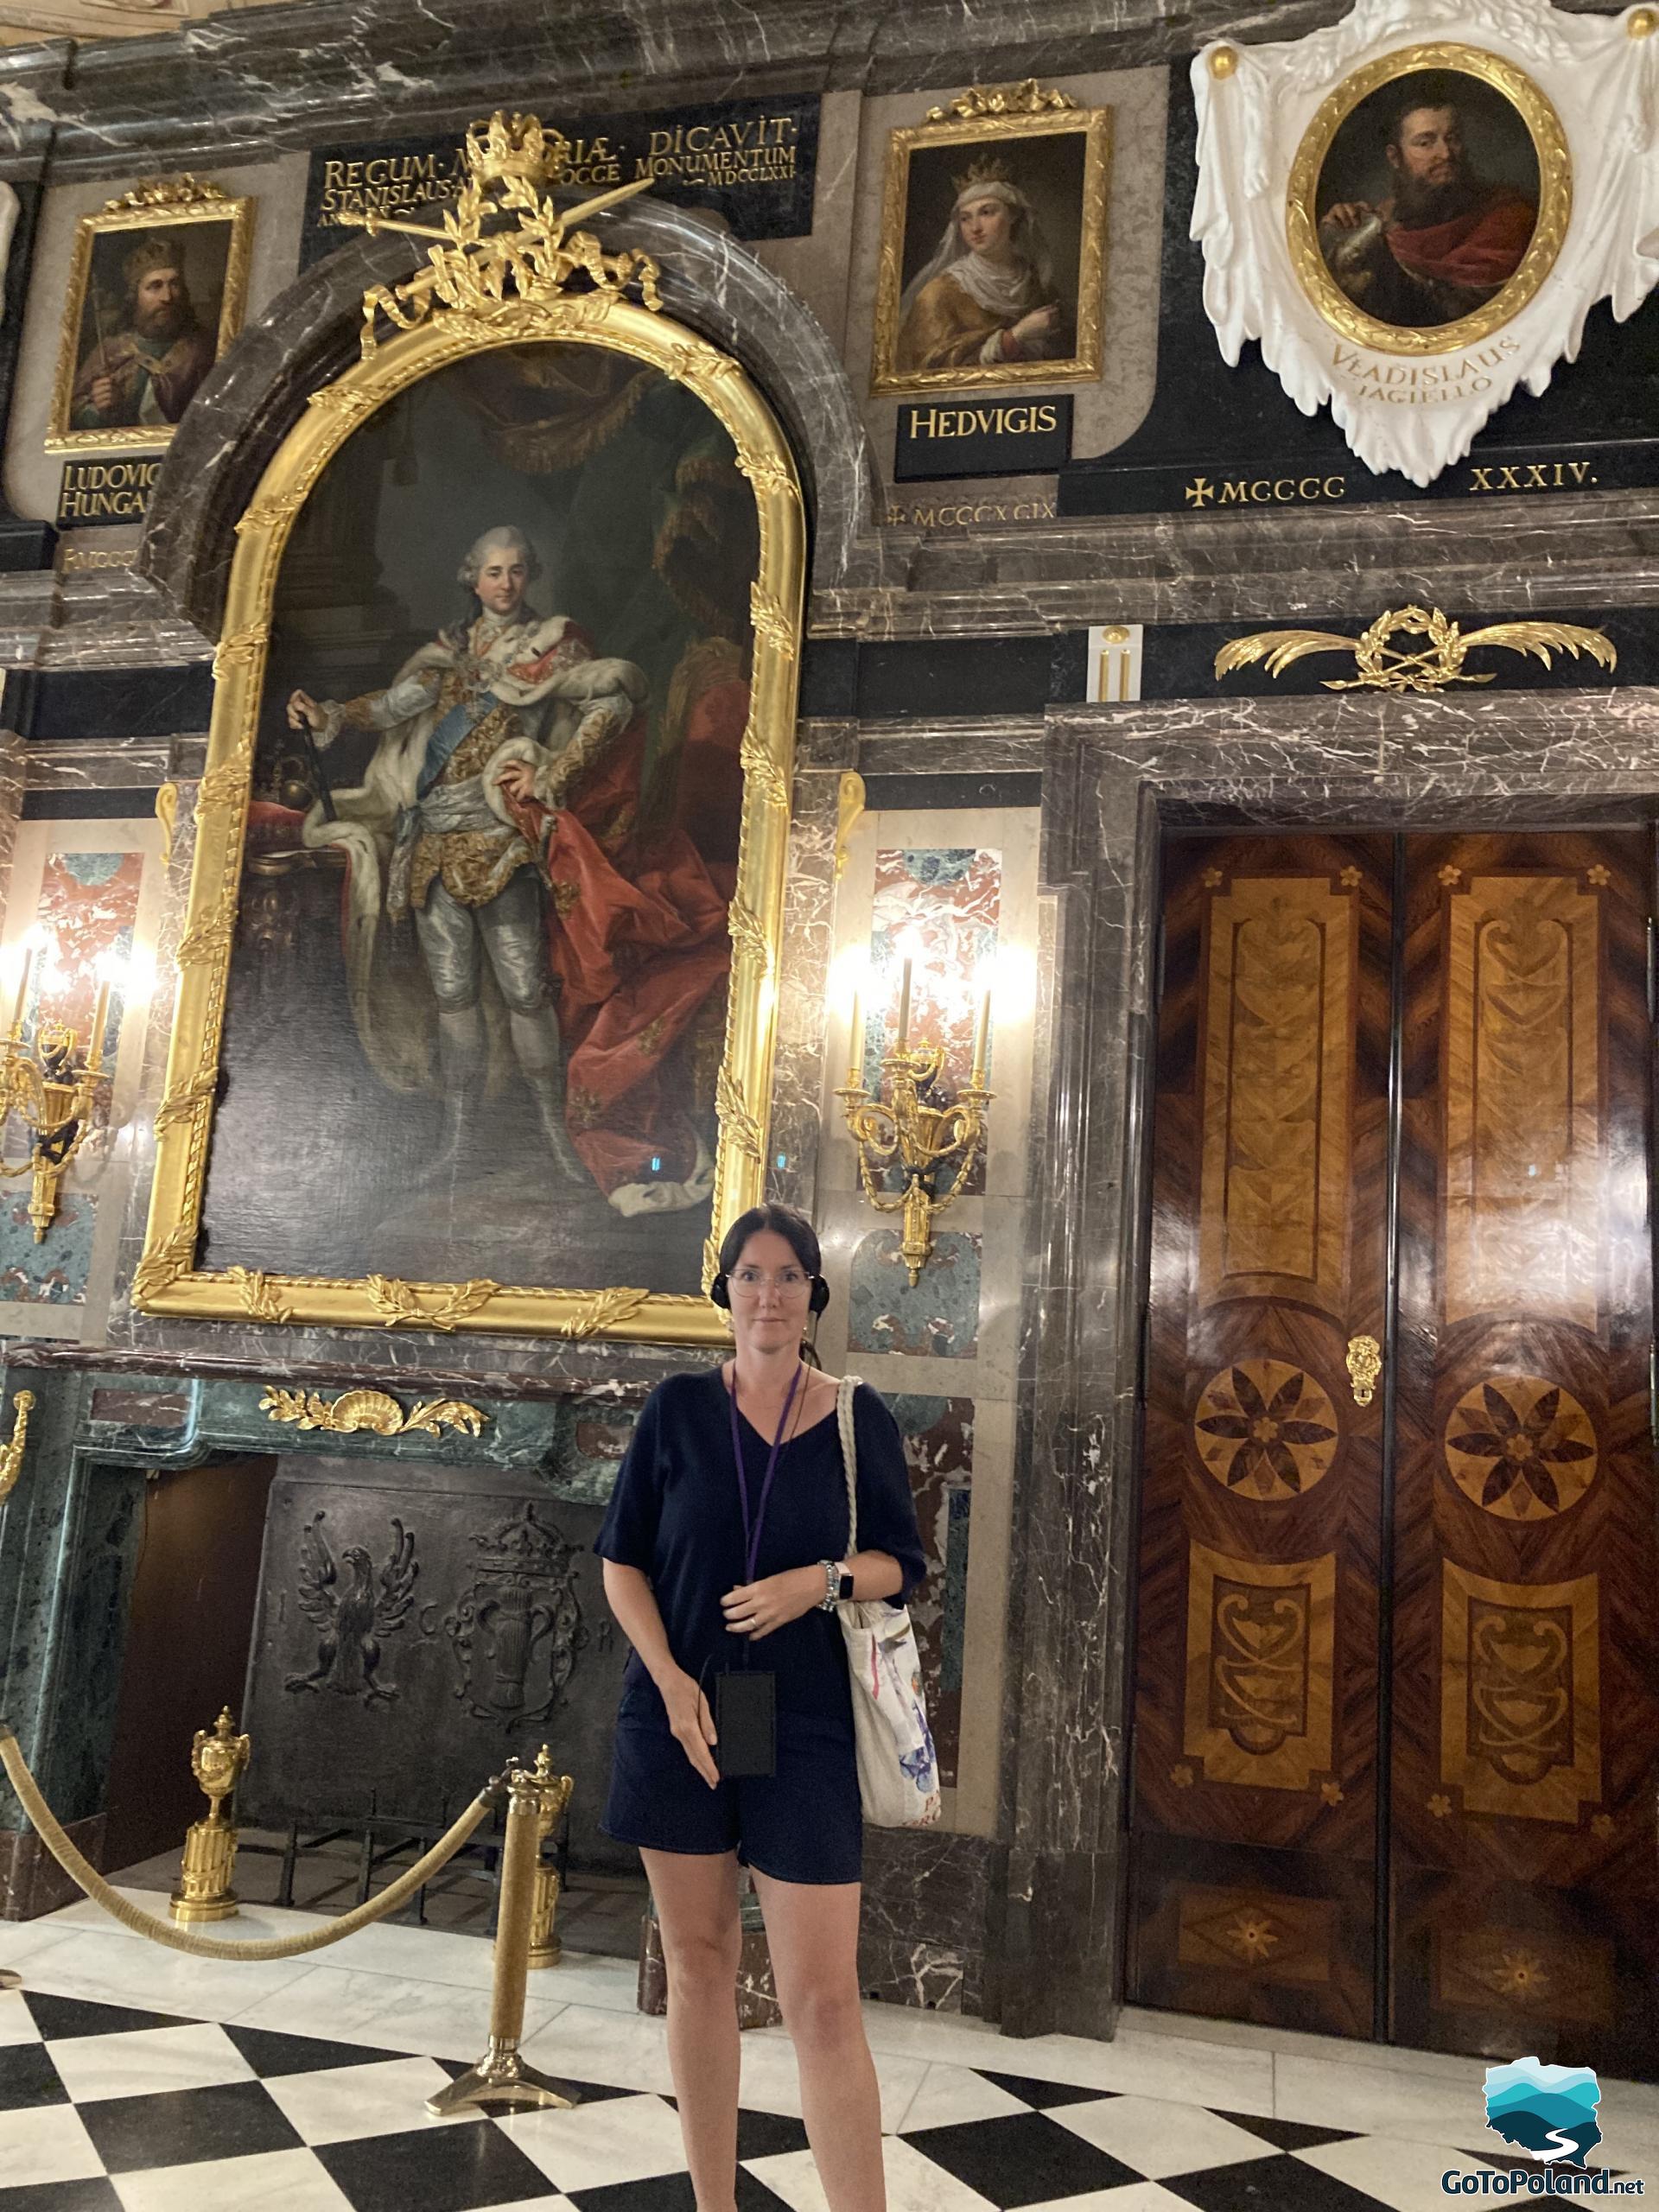 a woman is standing in a room with marble walls, a portrait of the last Polish king hangs behind her, there are images of other Polish rulers on the walls, you can also see inlaid doors